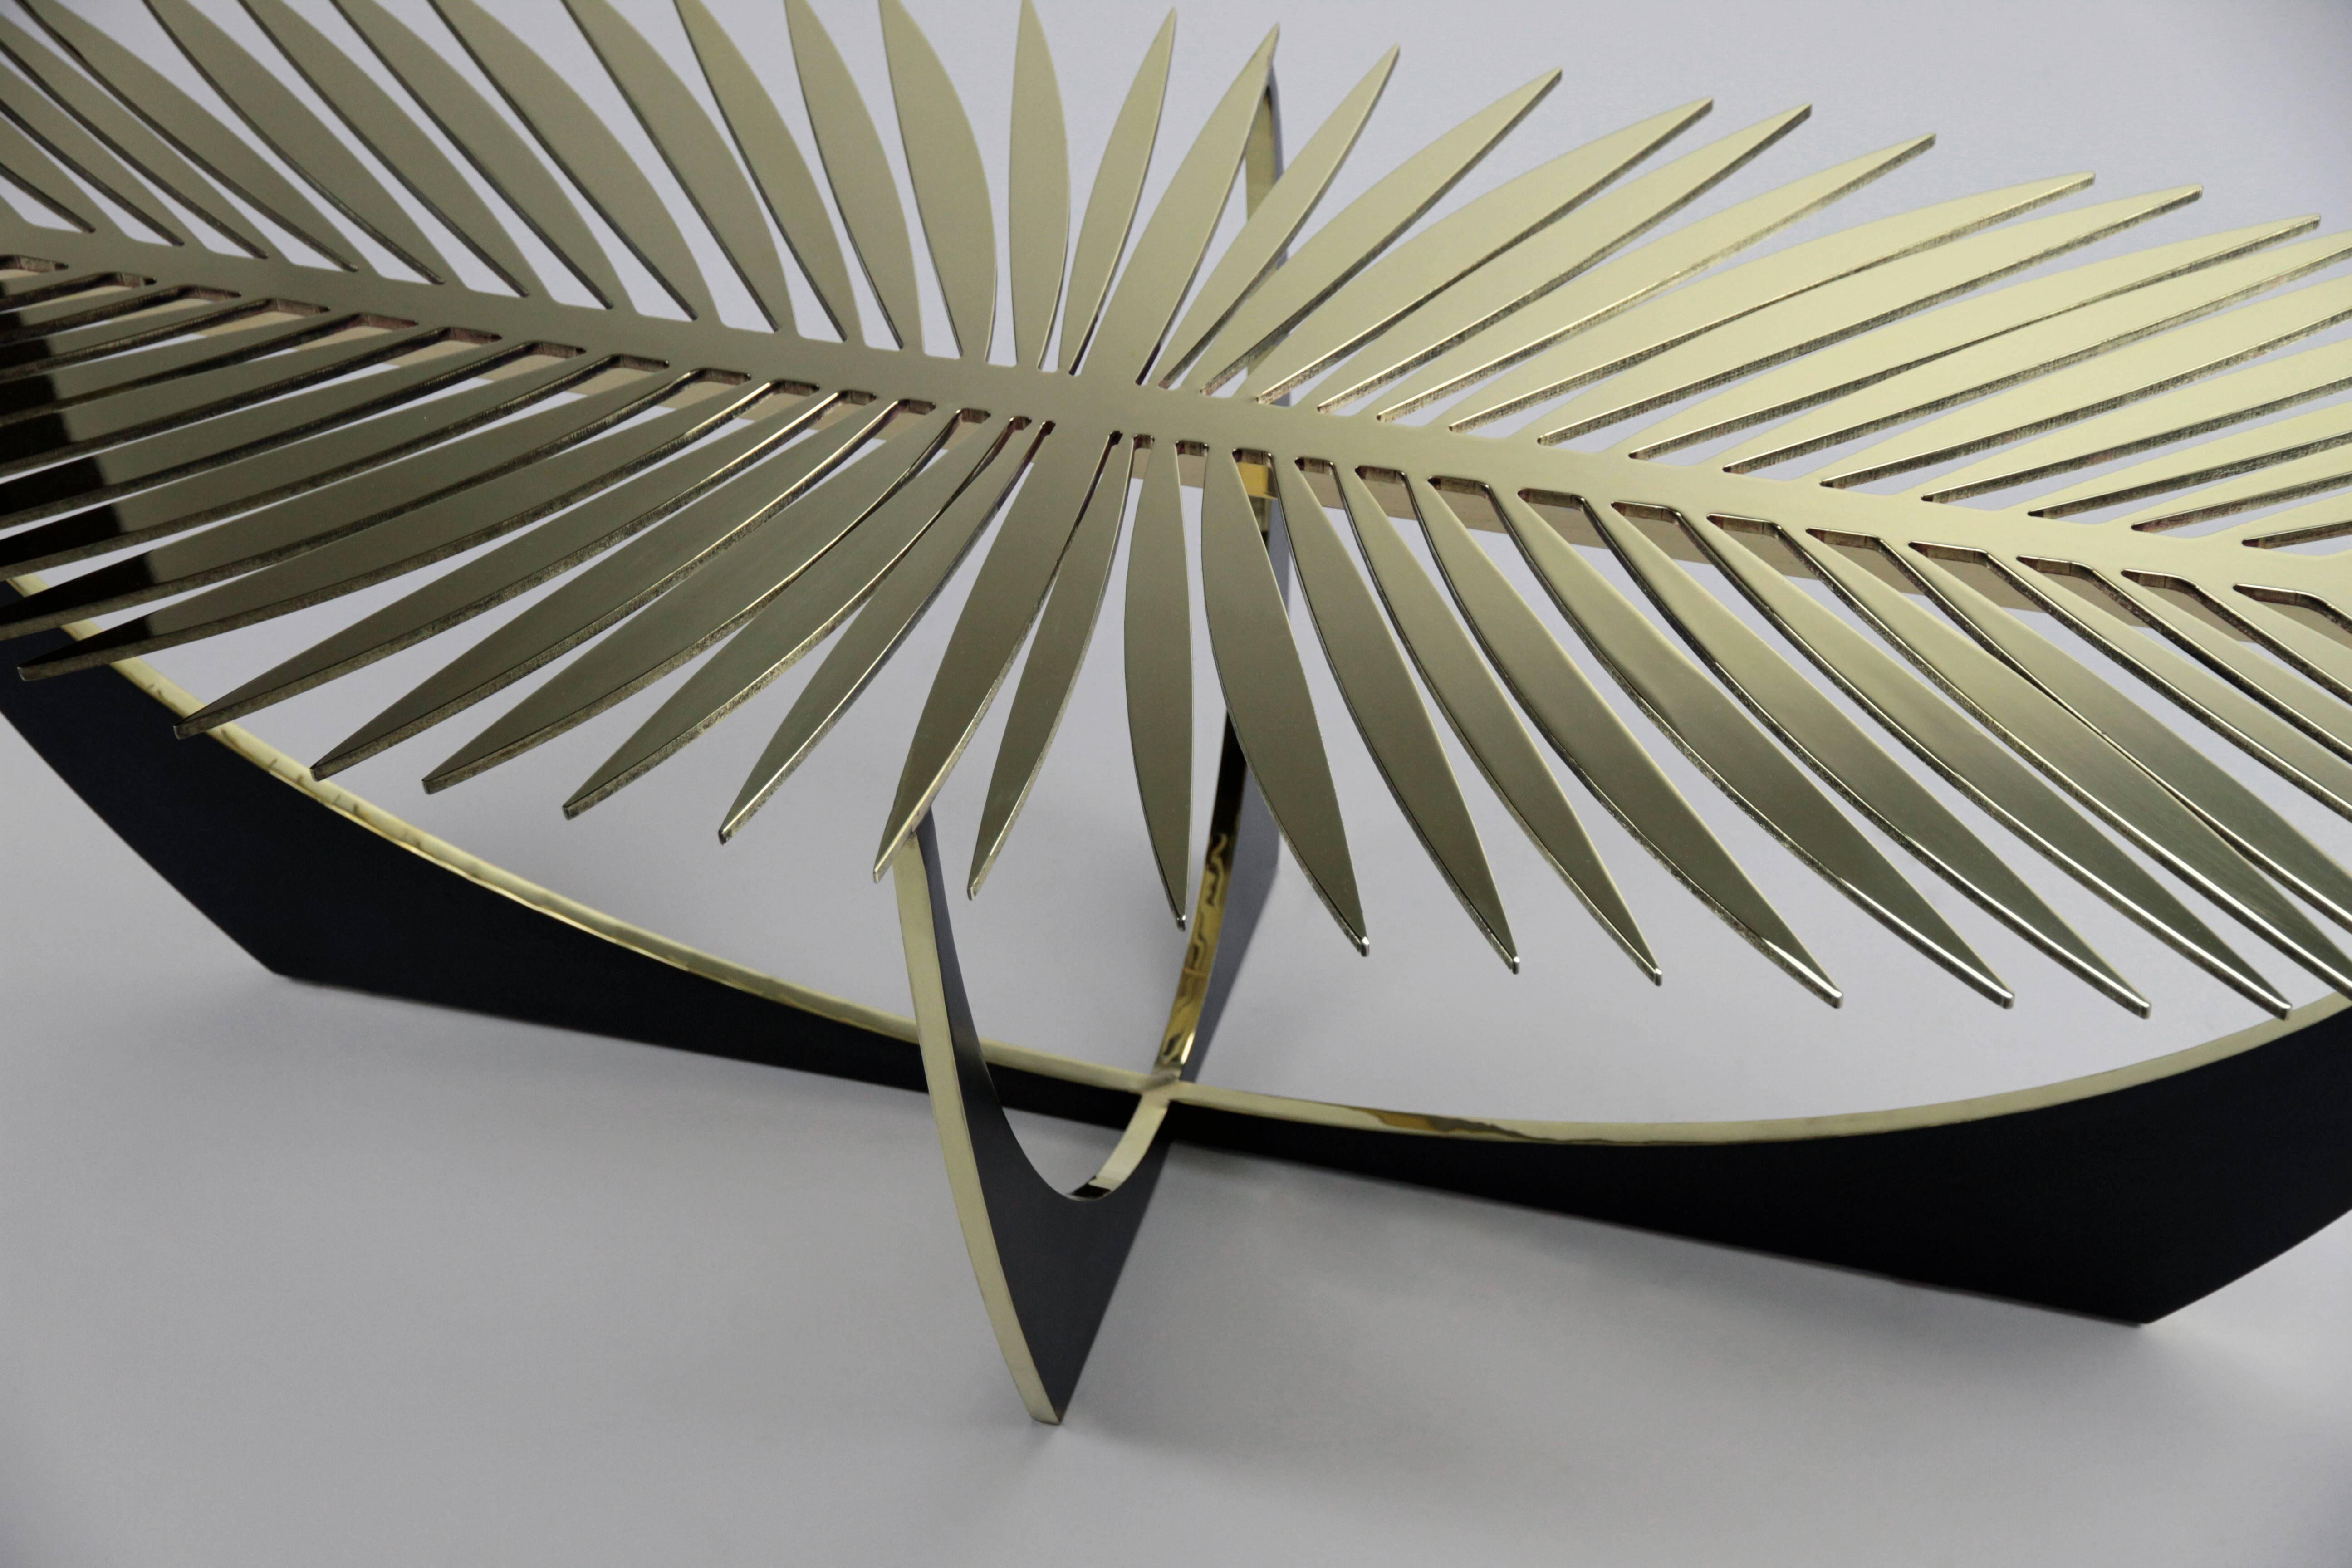 The Double Frond Coffee table is made of solid brass. 
The tabletop and edges of the base are high polished and waxed. The base sides have a blackened patina. 
The table works well sculpturally without glass but can be ordered with a 1/4 inch